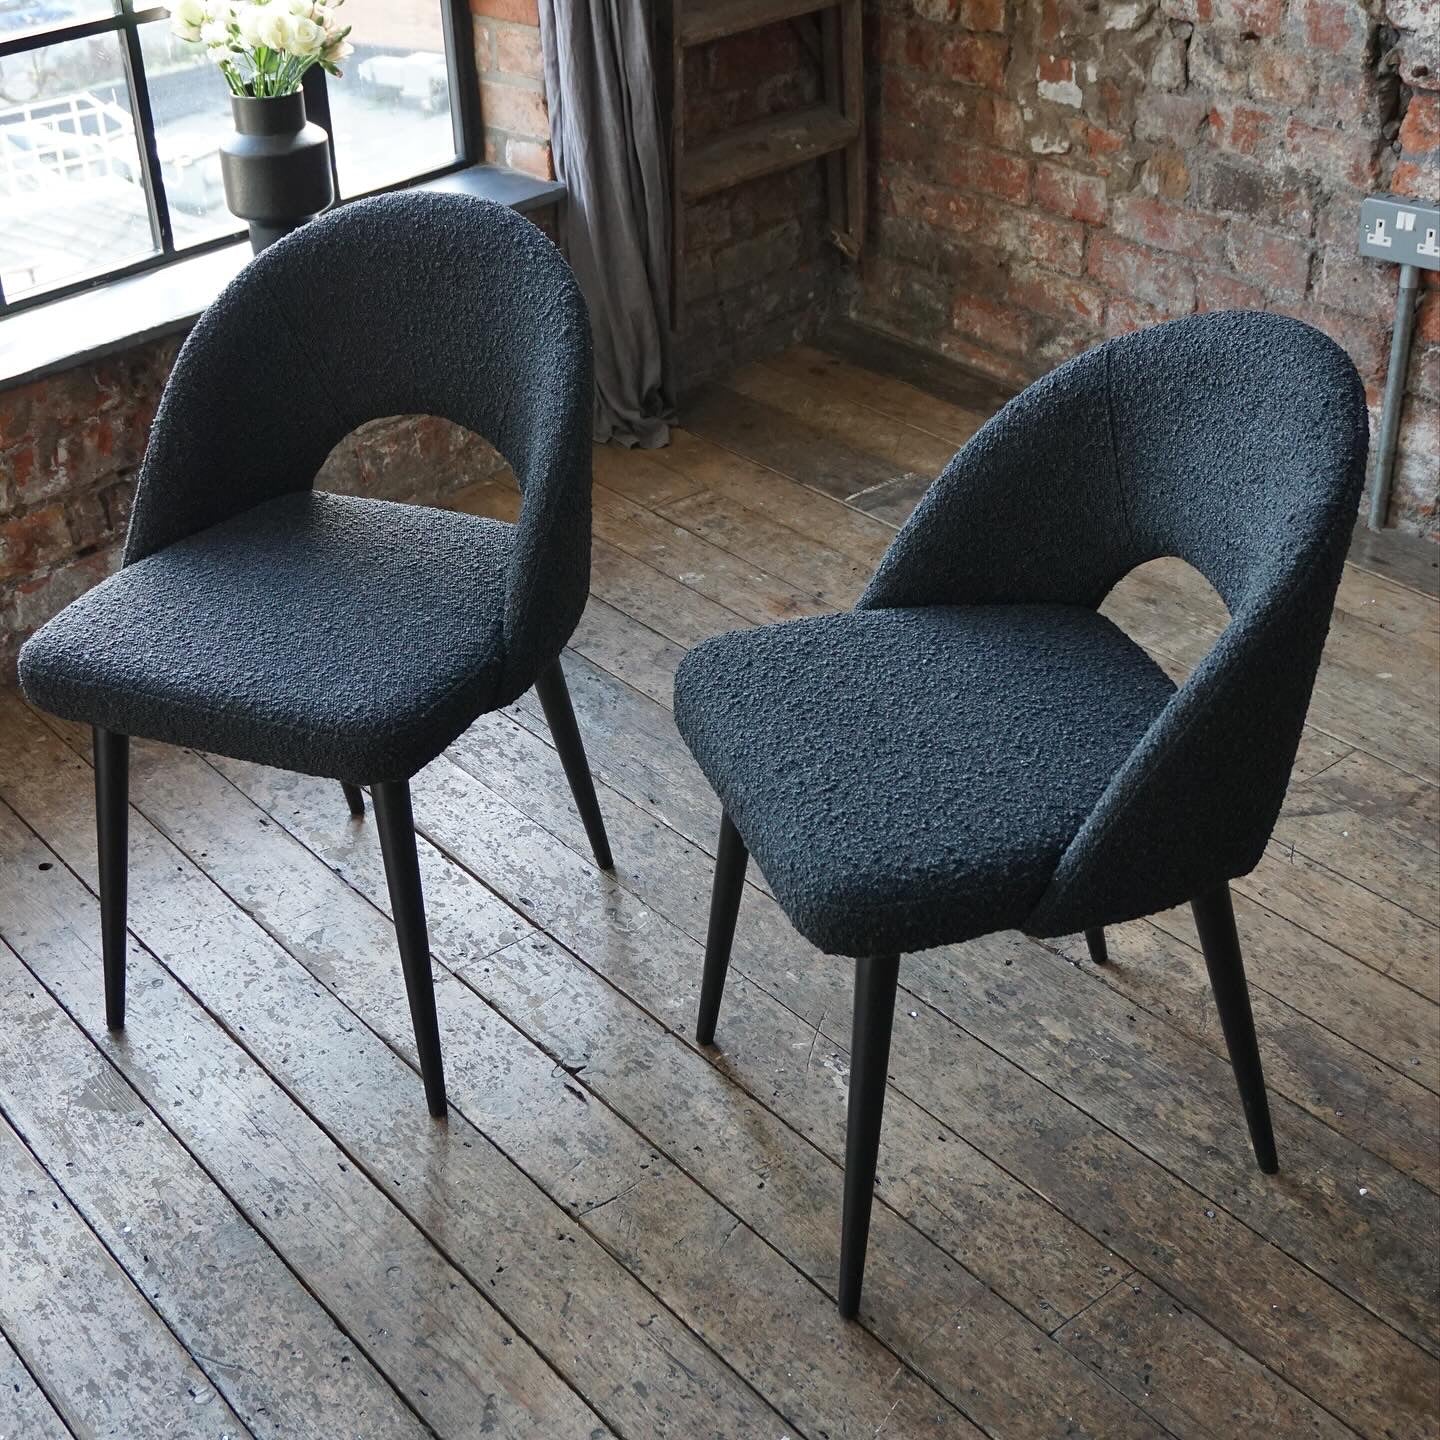 Bella Dining Chairs in Black Boucle (2pk)